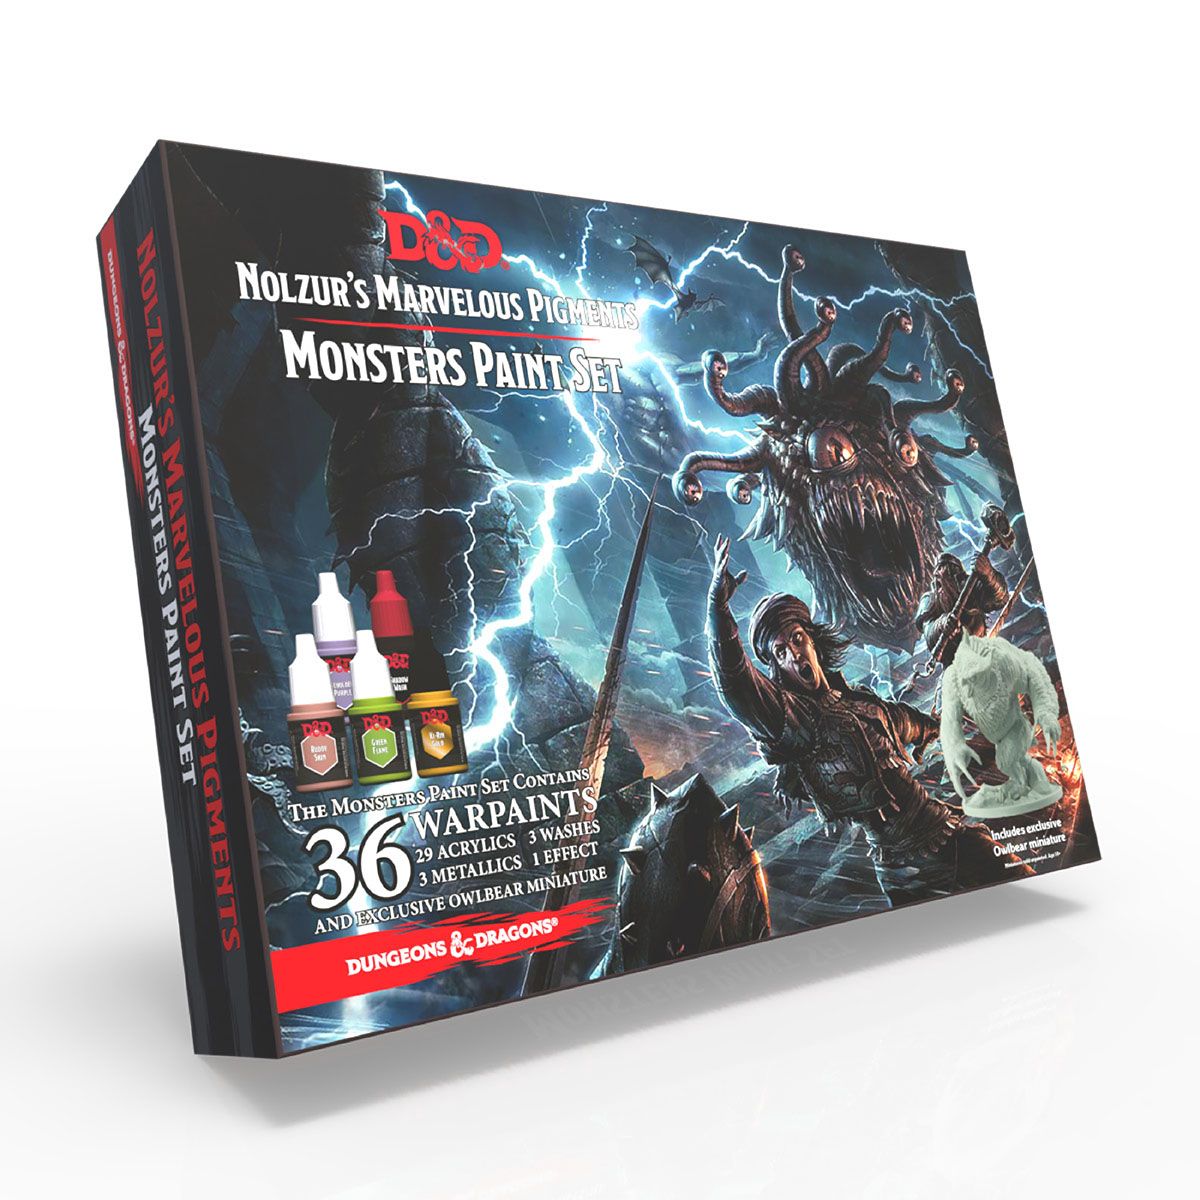 Dungeons & Dragons Nolzur's Marvelous Pigments: Monster Paint Set from The Army Painter at The Compleat Strategist